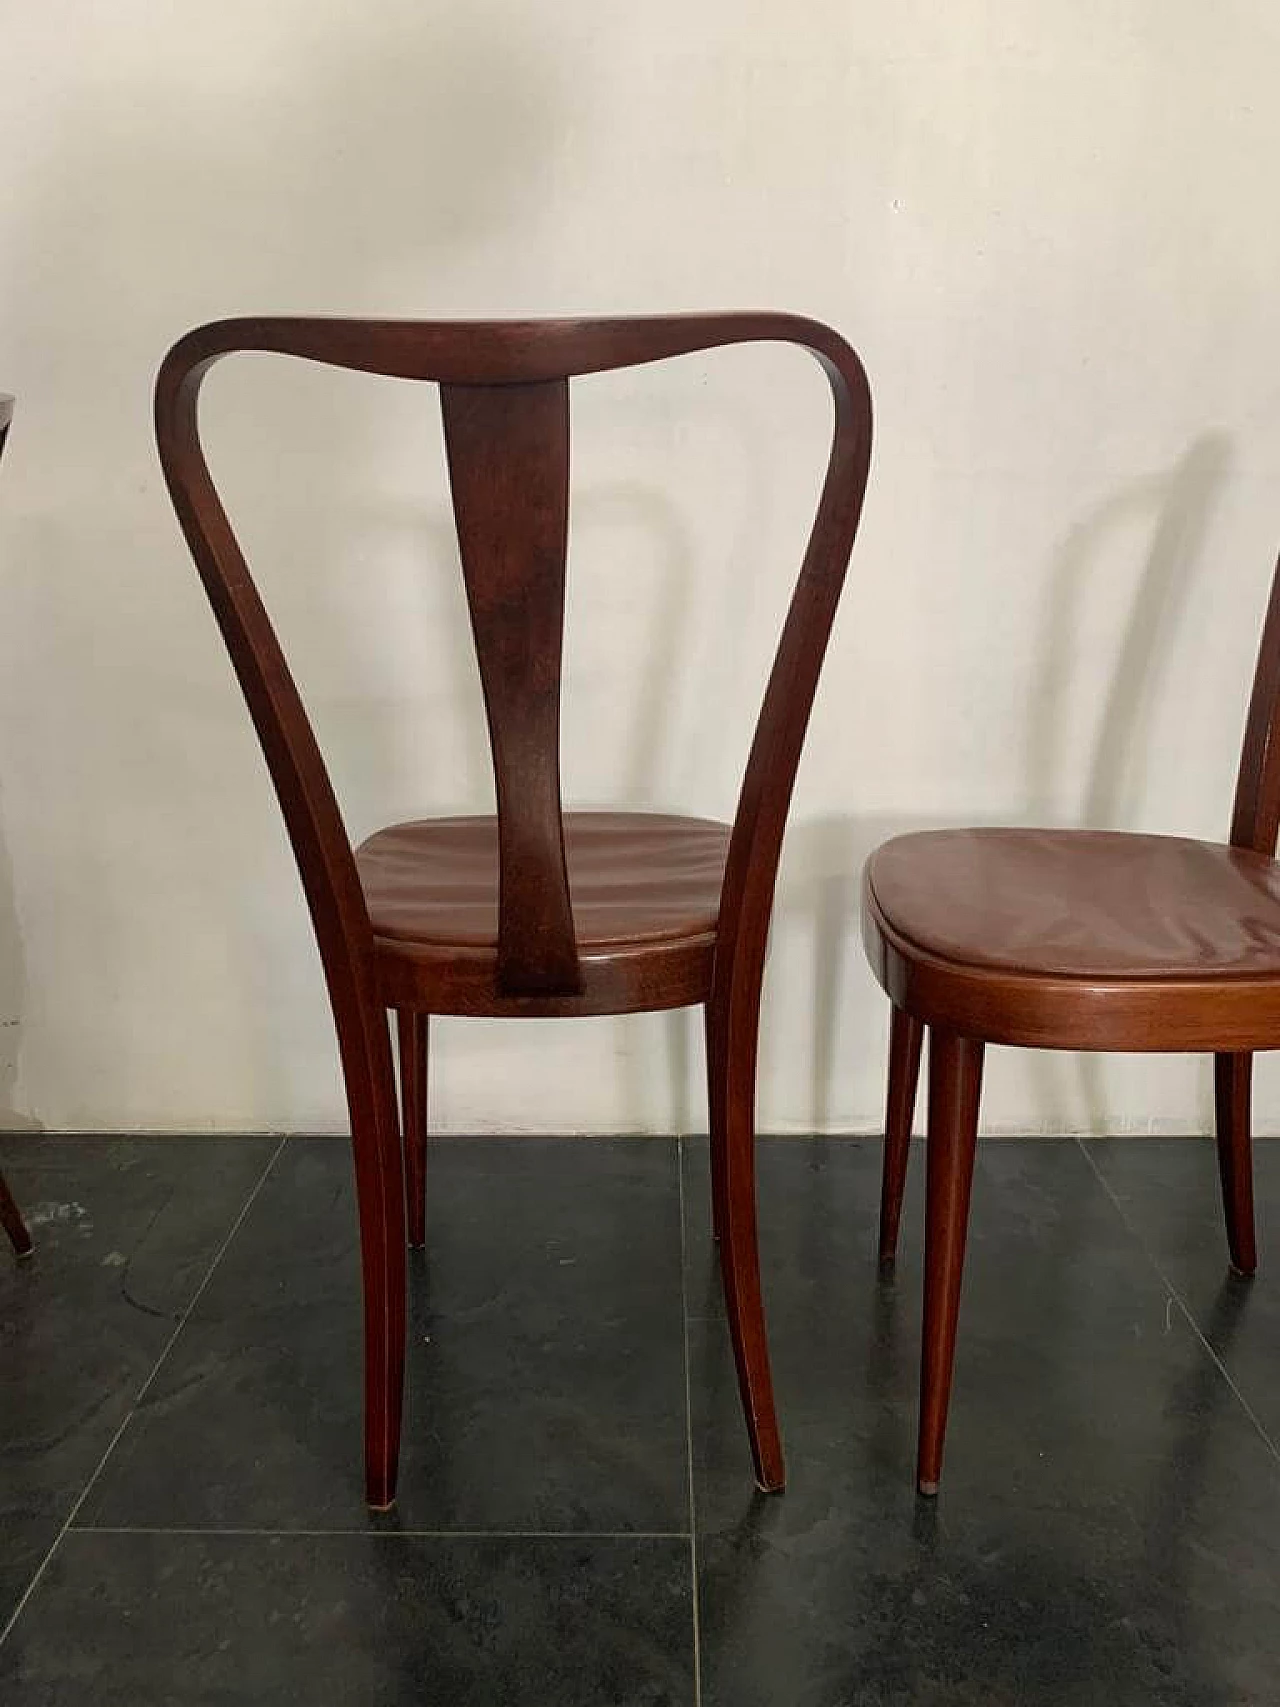 6 Dining chairs with leatherette seat by Pirelli Sapsa, 1950s 1201314